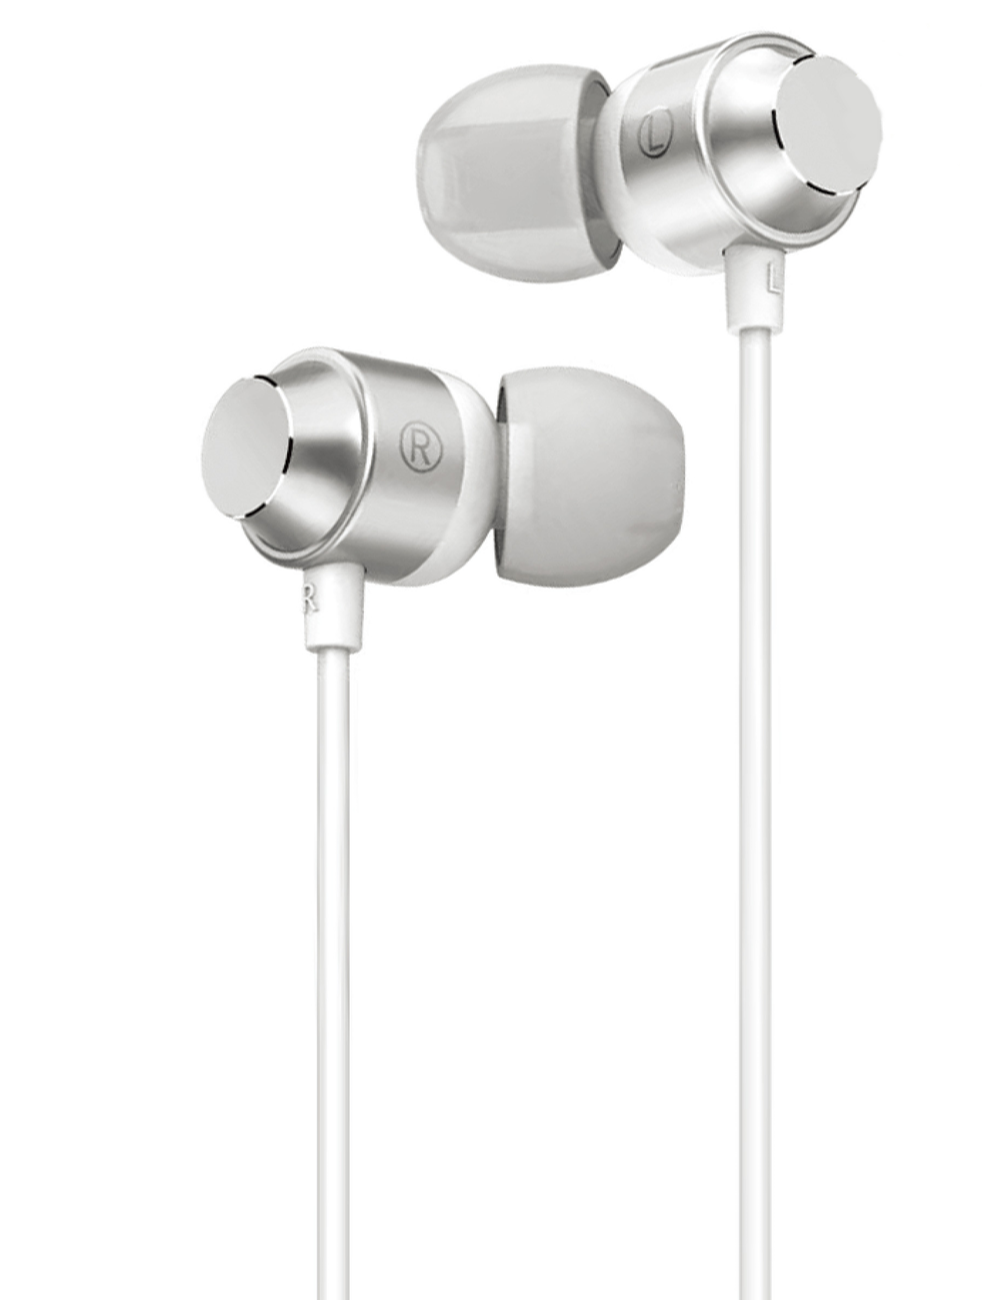 Auriculares Muvit For Charge Estéreo M32 Tipo C Magnéticos - blanco - 